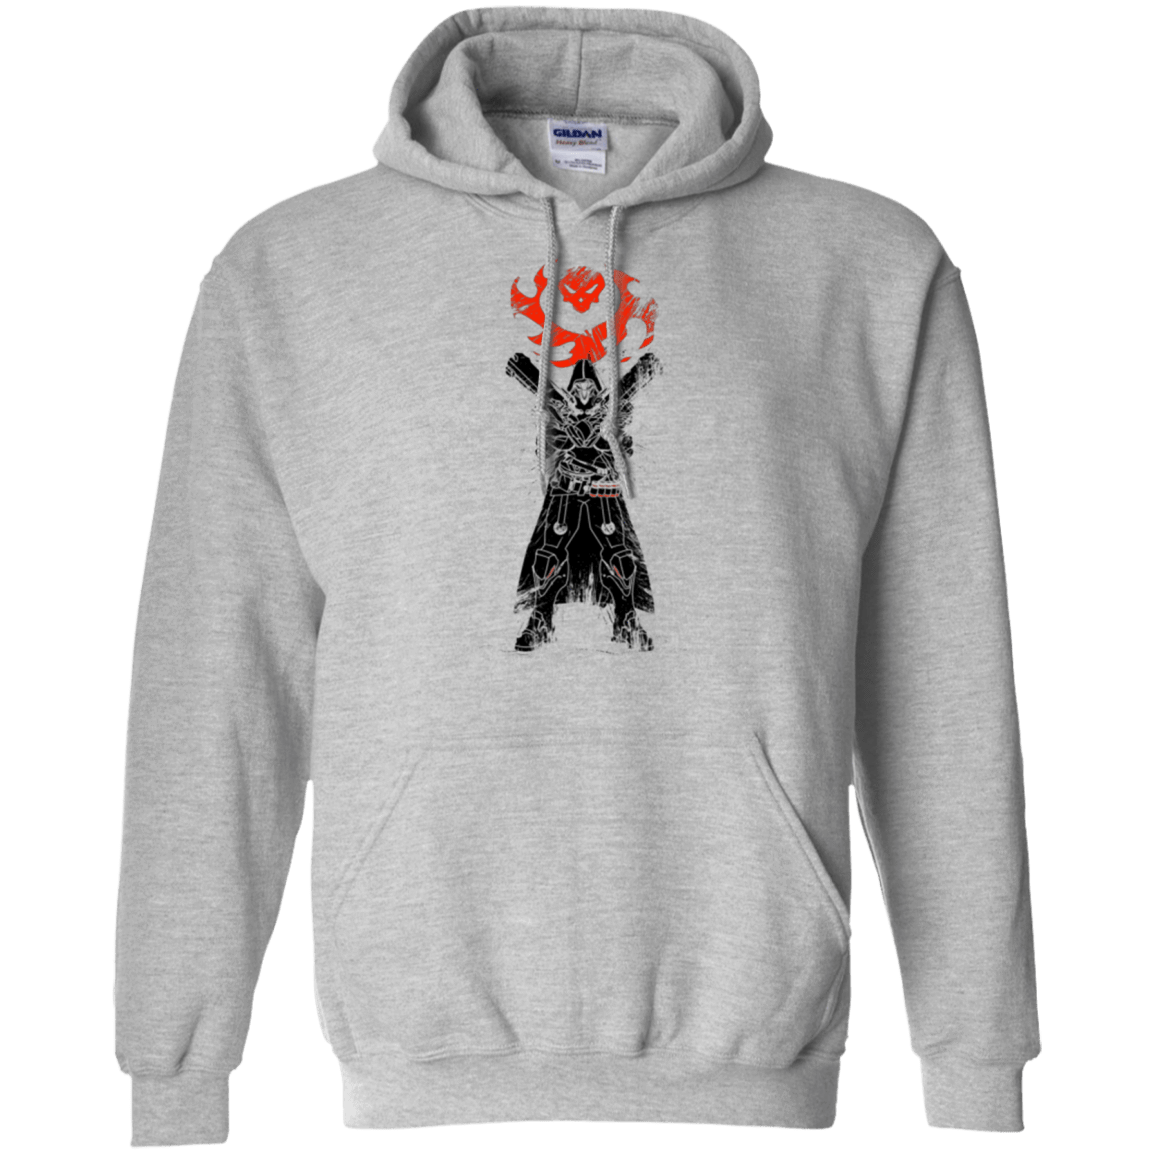 Sweatshirts Sport Grey / Small TRADITIONAL REAPER Pullover Hoodie